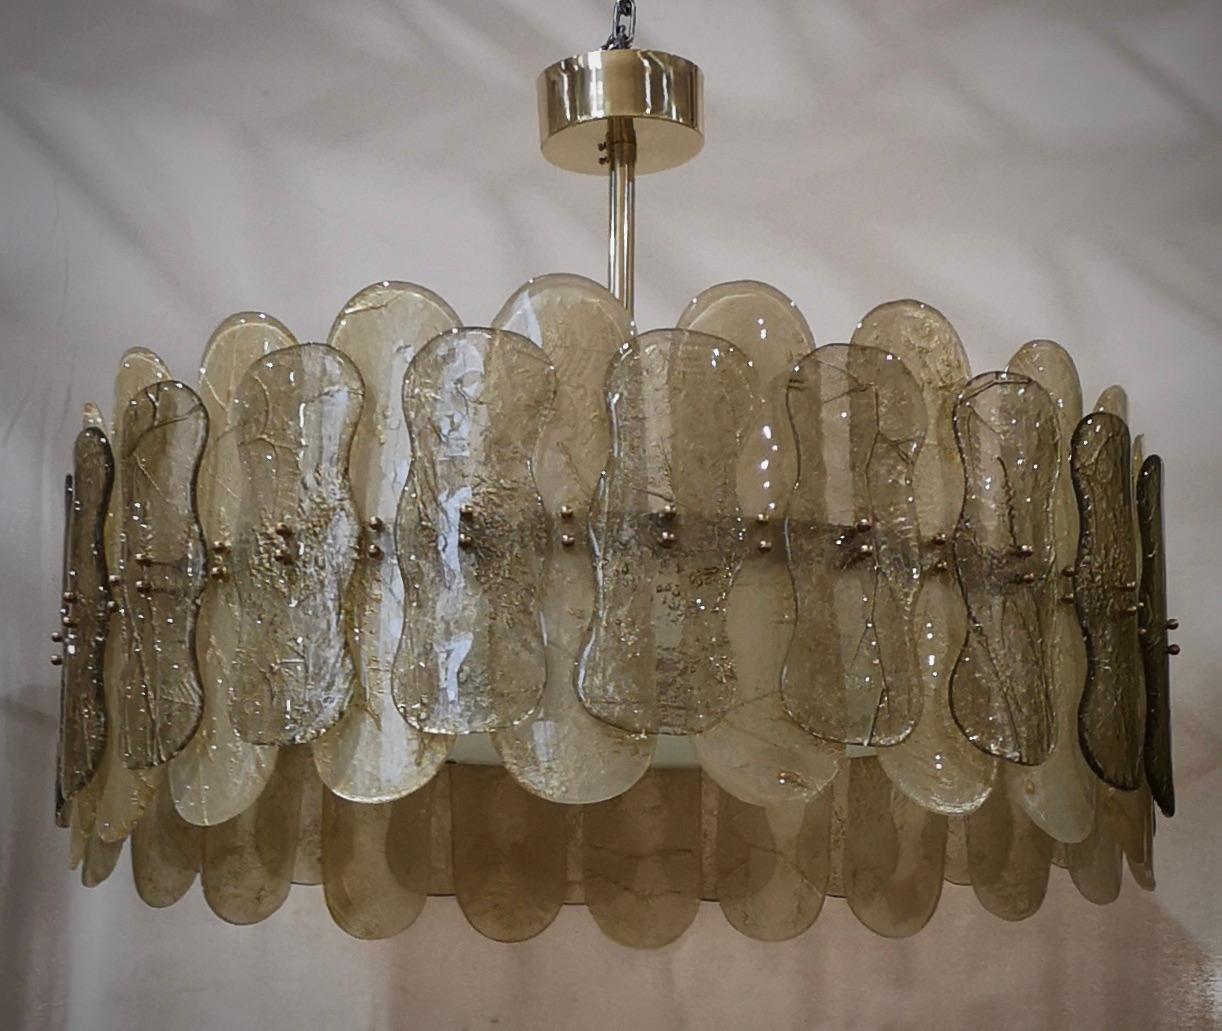 Fantastic round chandelier in Murano glass and polished brass. Note the shape of the amber and smoky Murano glass plates, very beautiful and particular. Simple but very elegant linear Murano chandelier.

Murano chandelier in artistic glass and